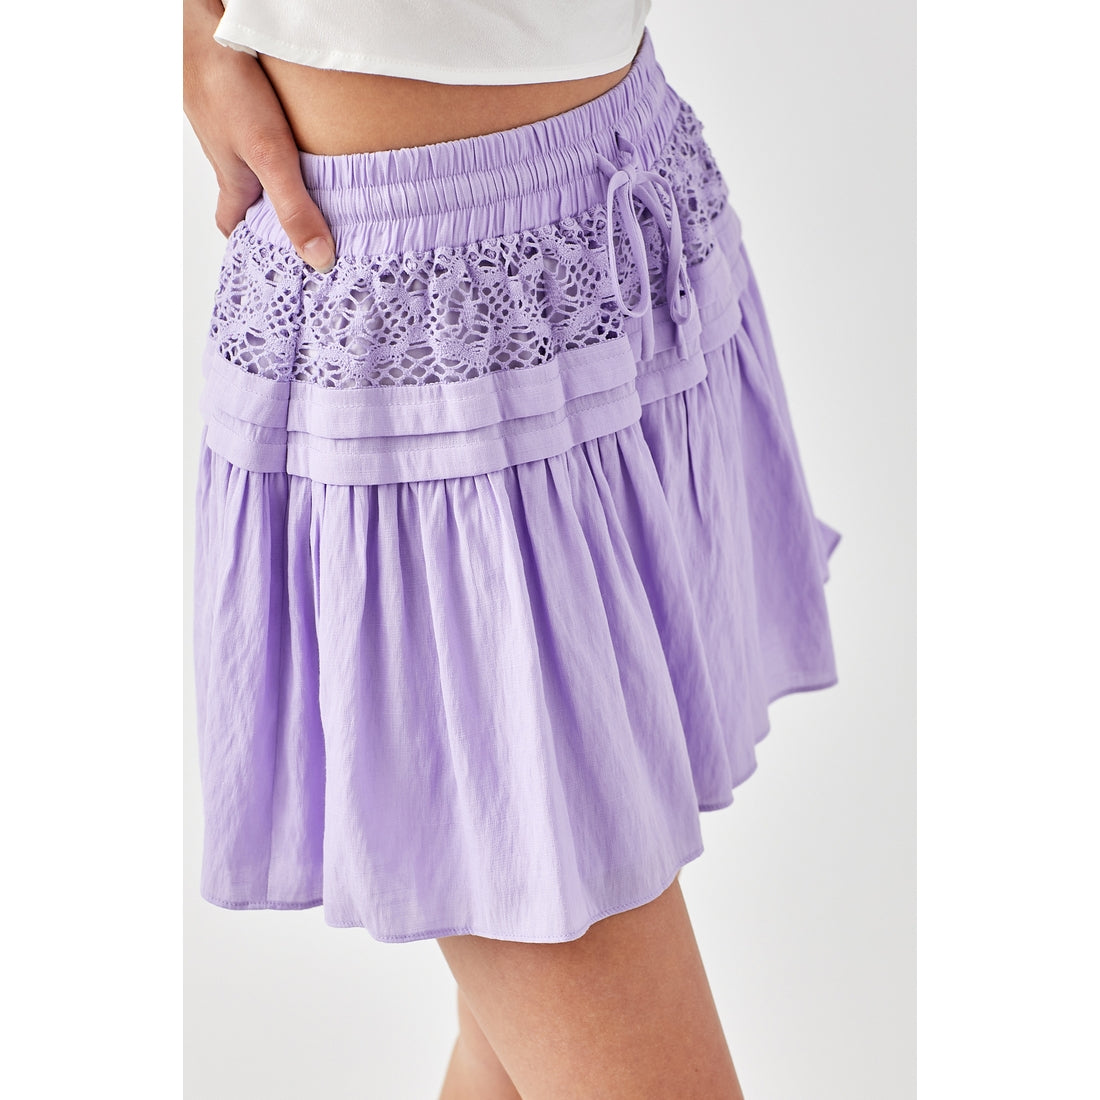 Heart of the Desert Lilac Mini Skirt in Size S, M, or L by Mustard Seed